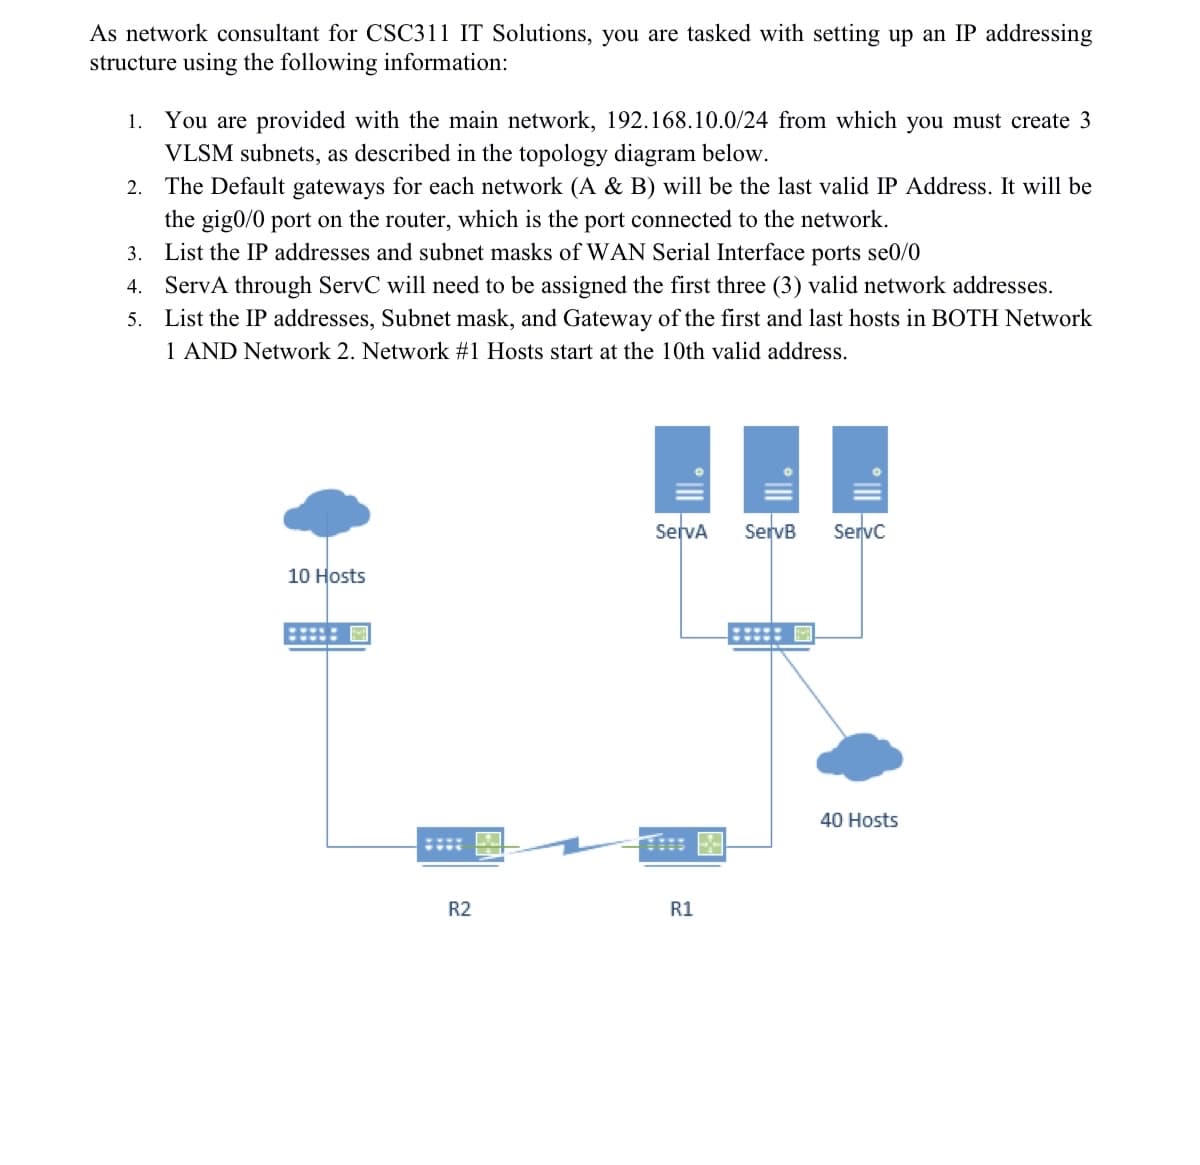 As network consultant for CSC311 IT Solutions, you are tasked with setting up an IP addressing
structure using the following information:
1. You are provided with the main network, 192.168.10.0/24 from which you must create 3
VLSM subnets, as described in the topology diagram below.
2. The Default gateways for each network (A & B) will be the last valid IP Address. It will be
the gig0/0 port on the router, which is the port connected to the network.
3. List the IP addresses and subnet masks of WAN Serial Interface ports se0/0
4. ServA through ServC will need to be assigned the first three (3) valid network addresses.
5. List the IP addresses, Subnet mask, and Gateway of the first and last hosts in BOTH Network
1 AND Network 2. Network #1 Hosts start at the 10th valid address.
10 Hosts
ServA
22
R2
R1
ServB ServC
40 Hosts